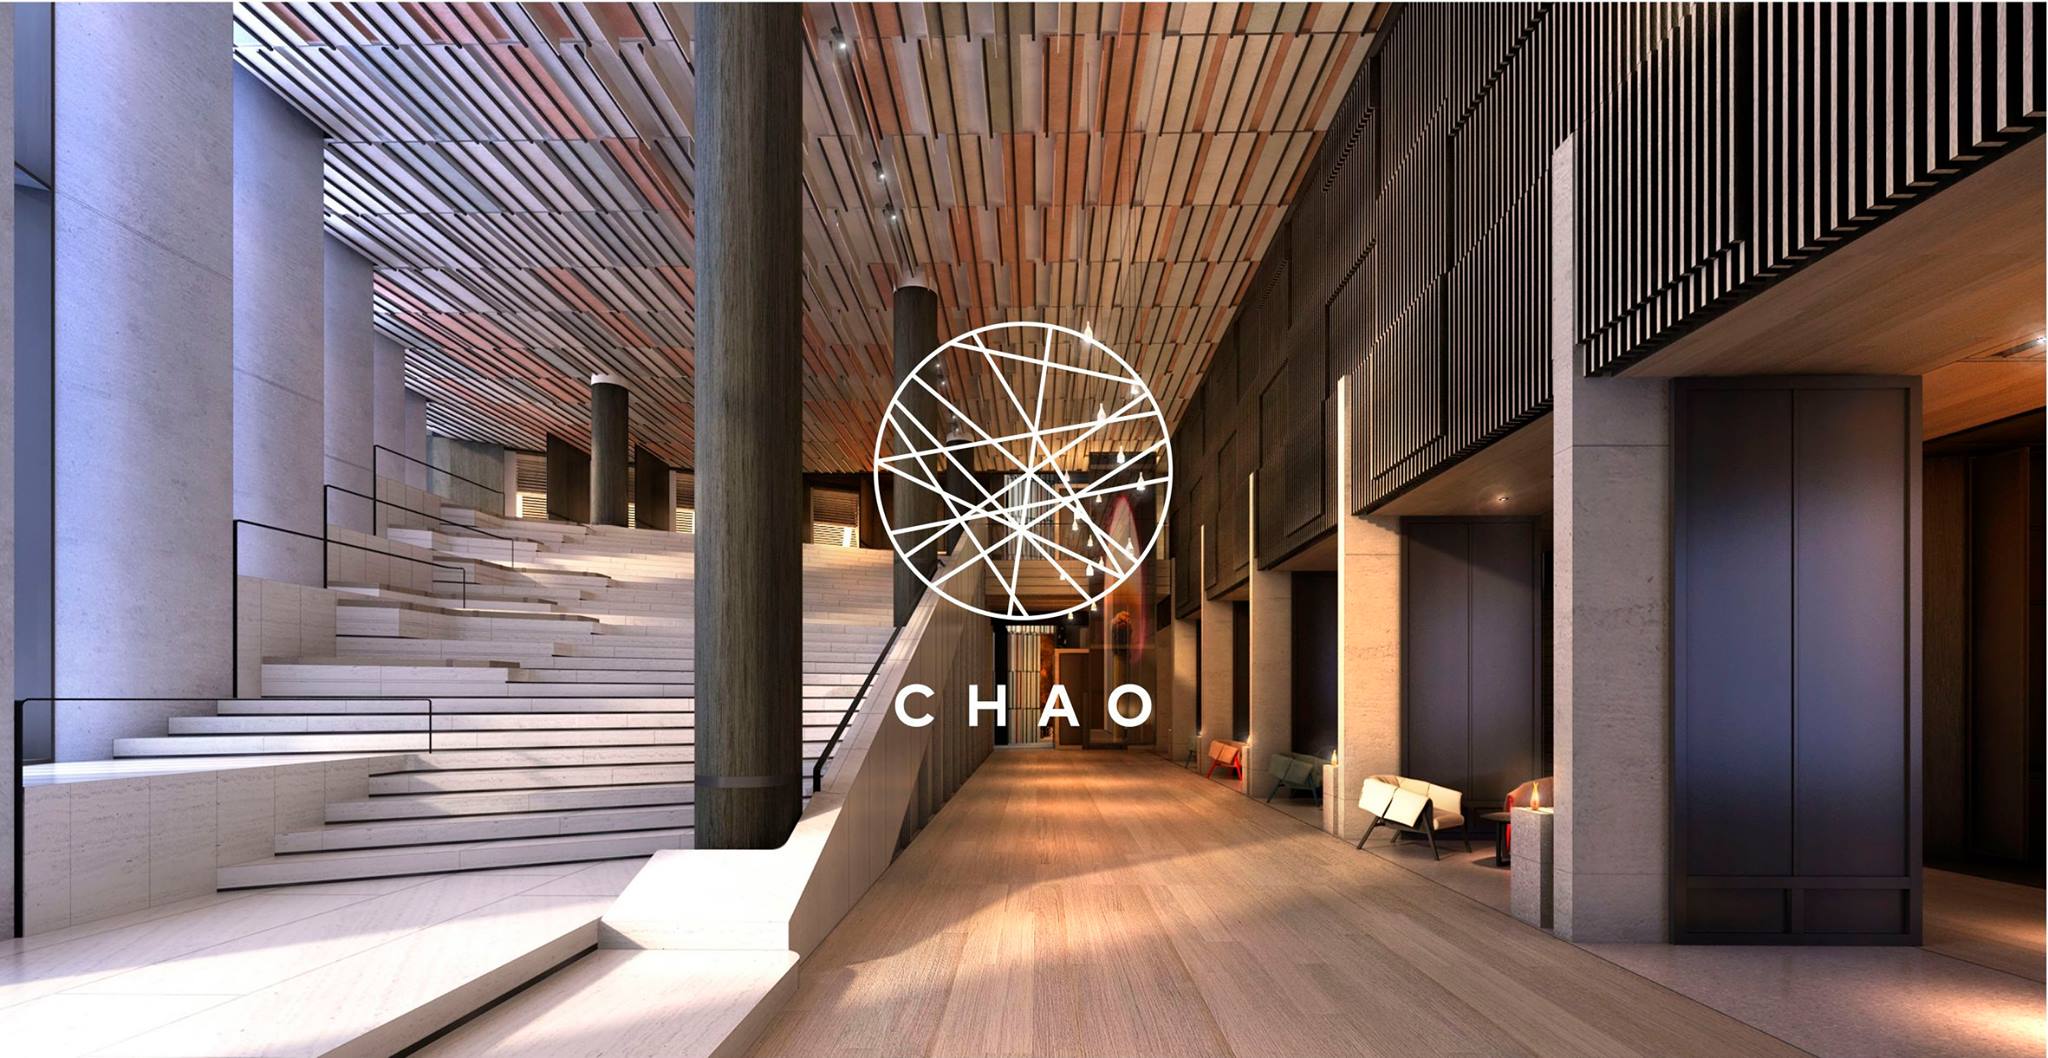 Former City Hotel Site to Re-Open as CHAO July 11